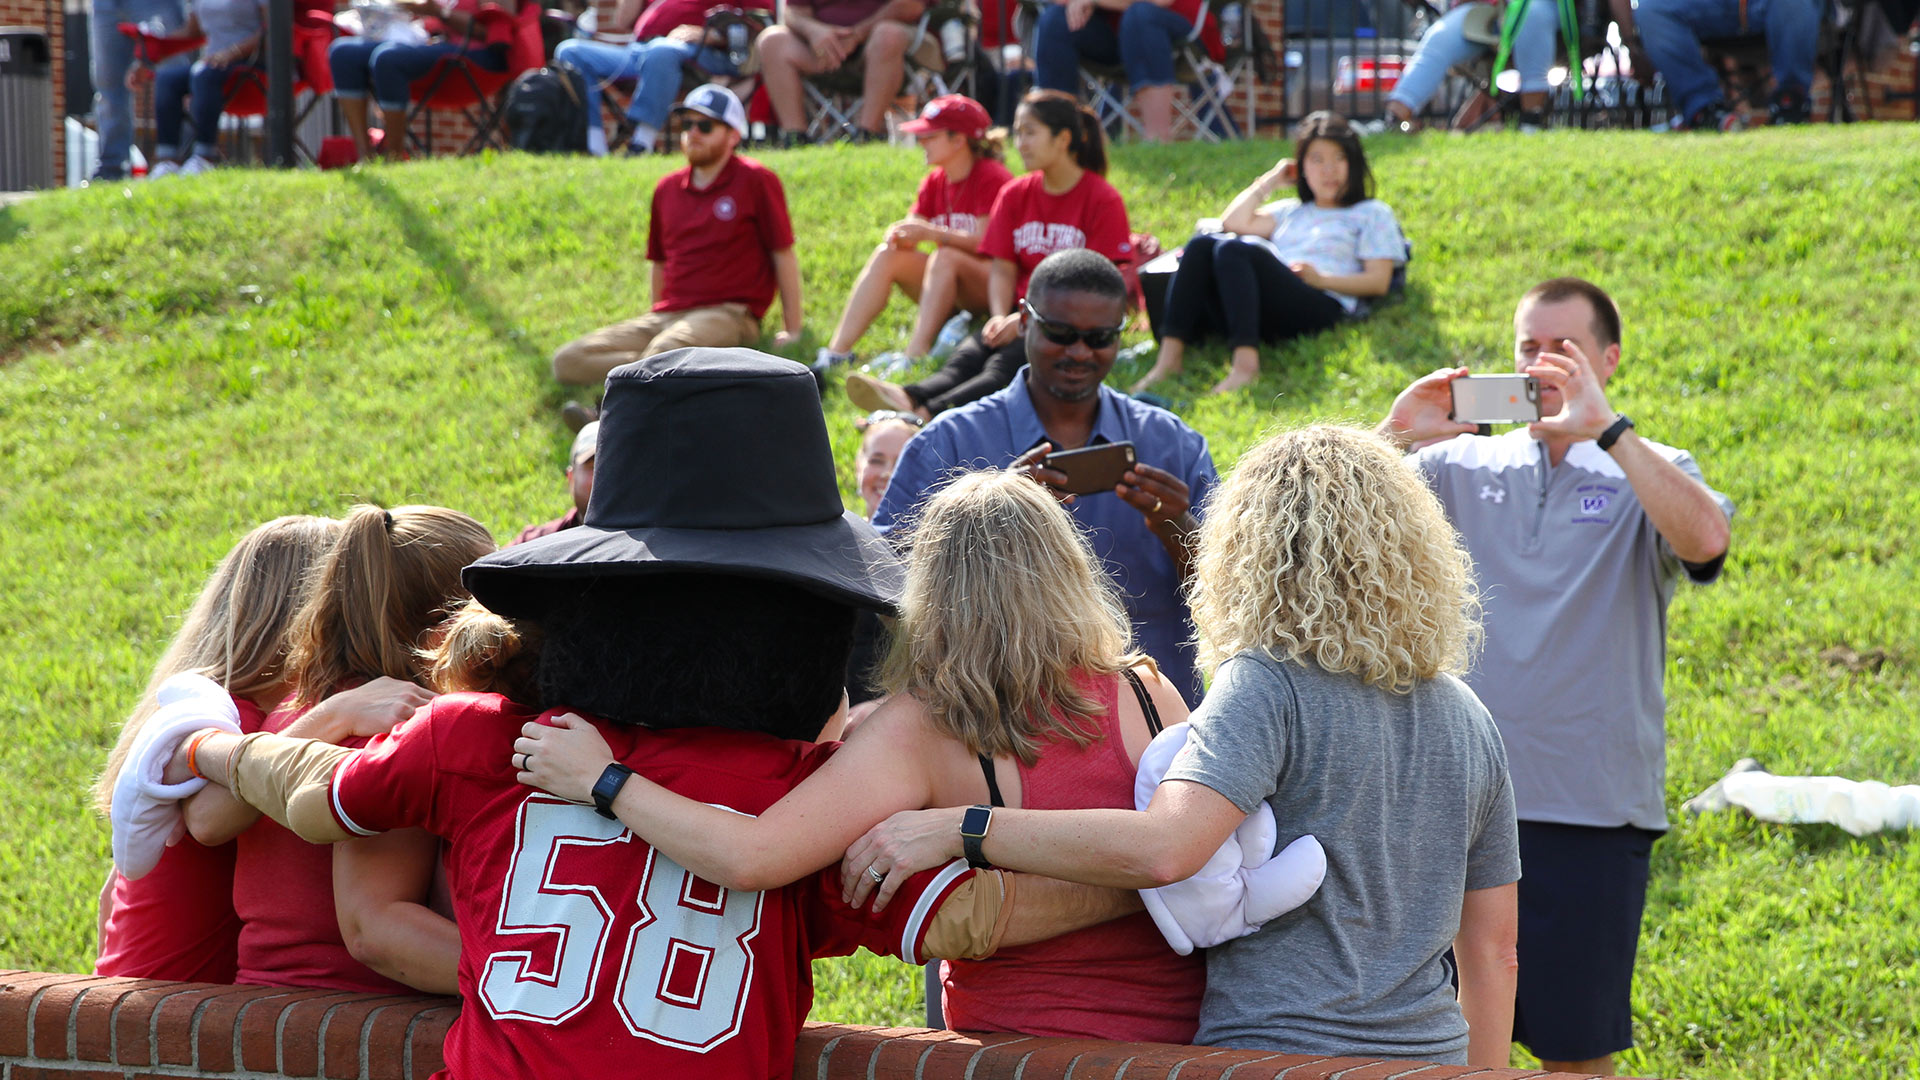 A man takes a photo of friends and family with Nathan the Quaker Man mascot at Homecoming.